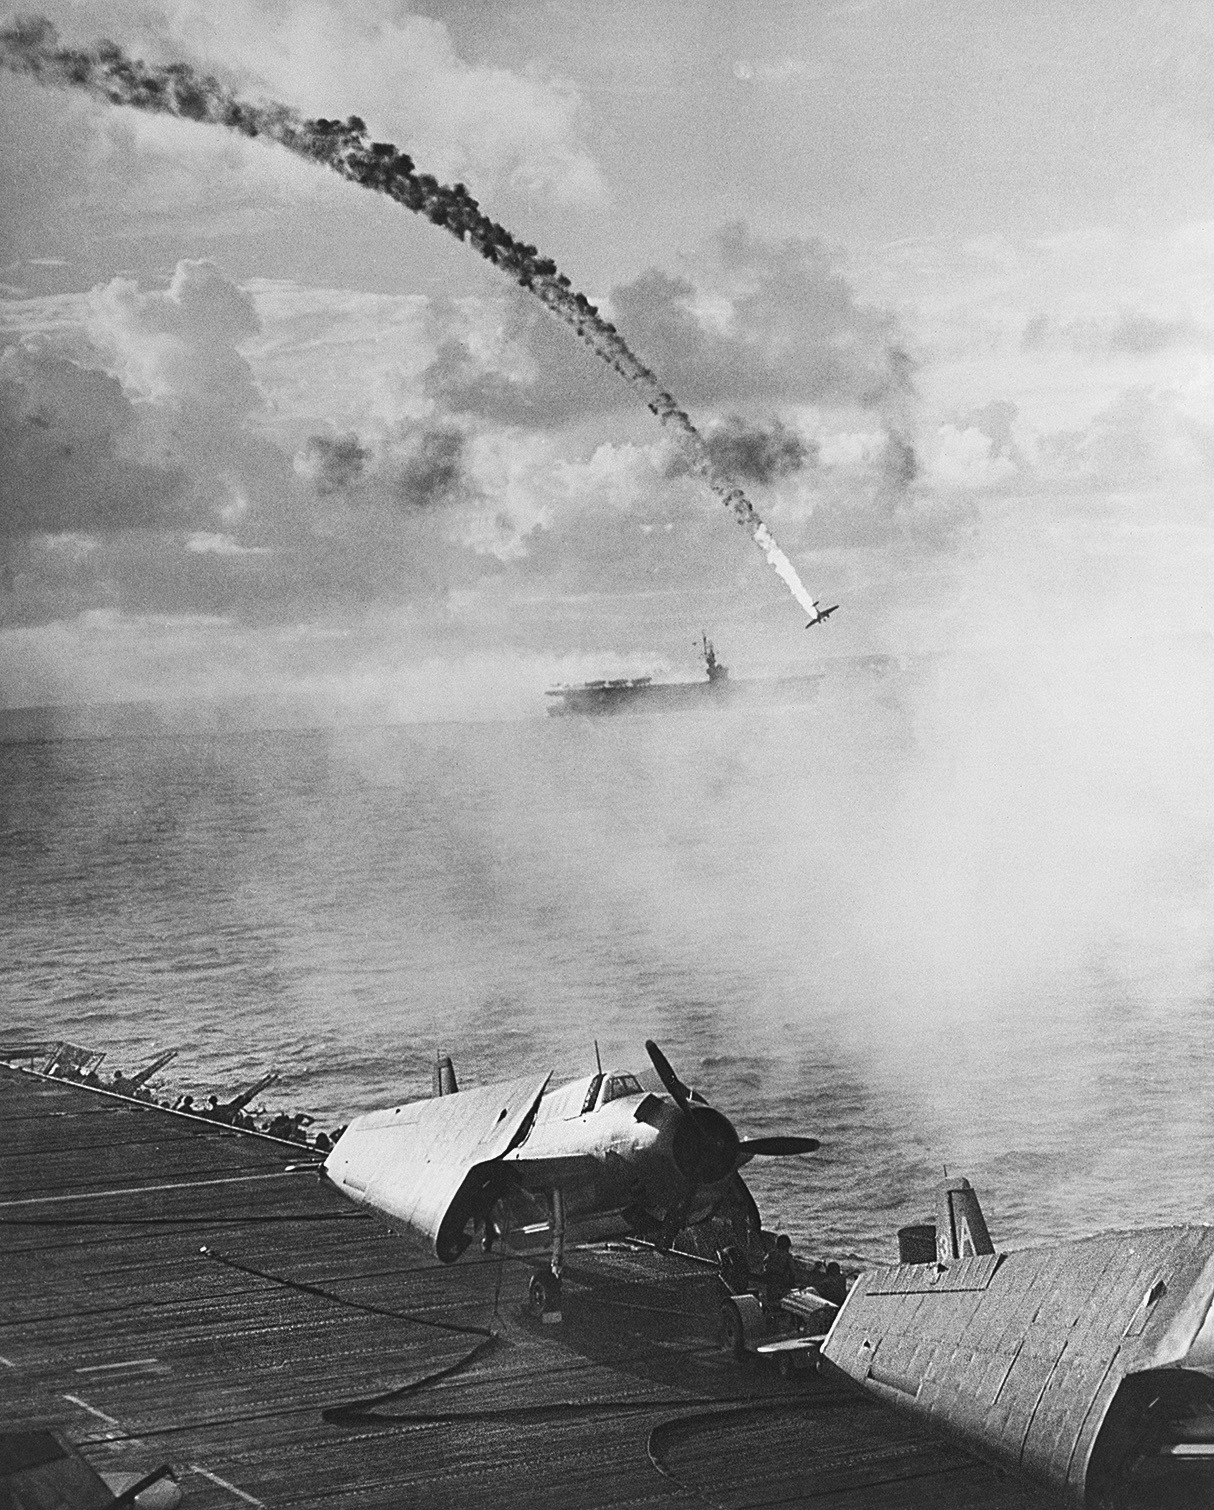 Japanese aircraft being shot down as it attempted to attack escort carrier Kitkun Bay, near Marianas Islands, Jun 1944, photo 2 of 2